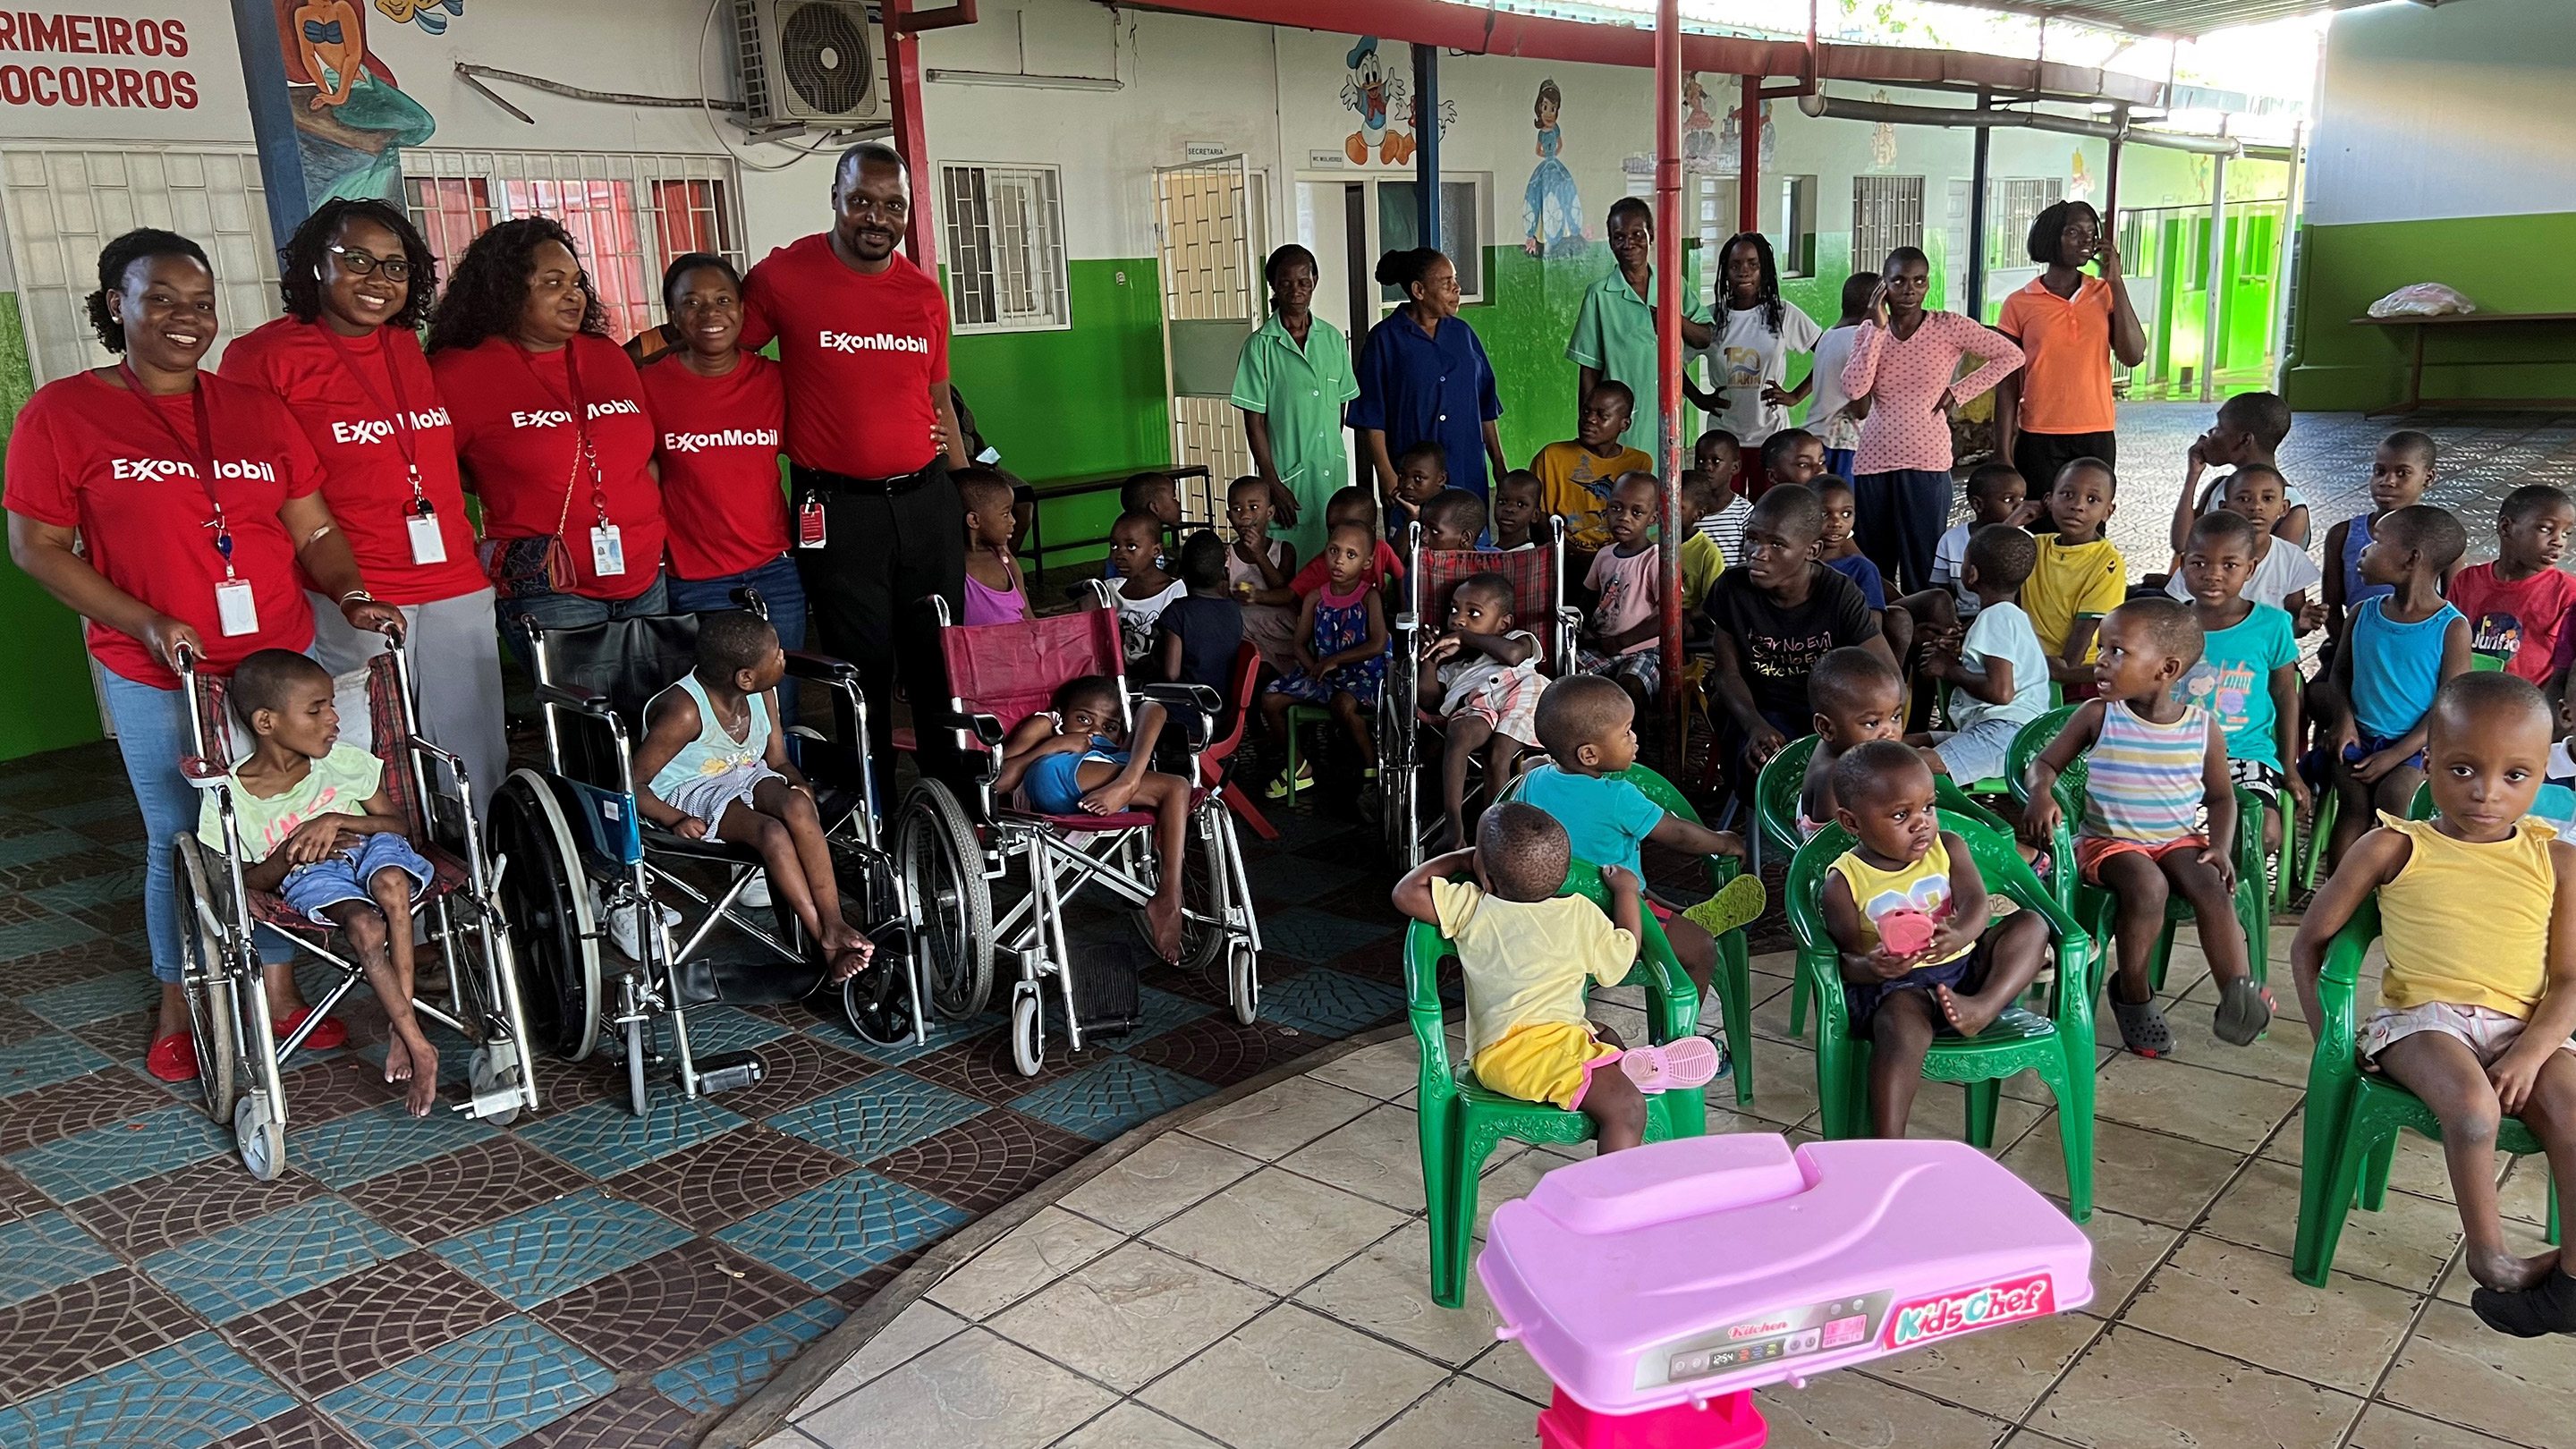 Infantario Primeiro do Maio’ (Infantario) in Maputo city provides shelters for children in need, including orphans and children with disabilities and chronic illnesses